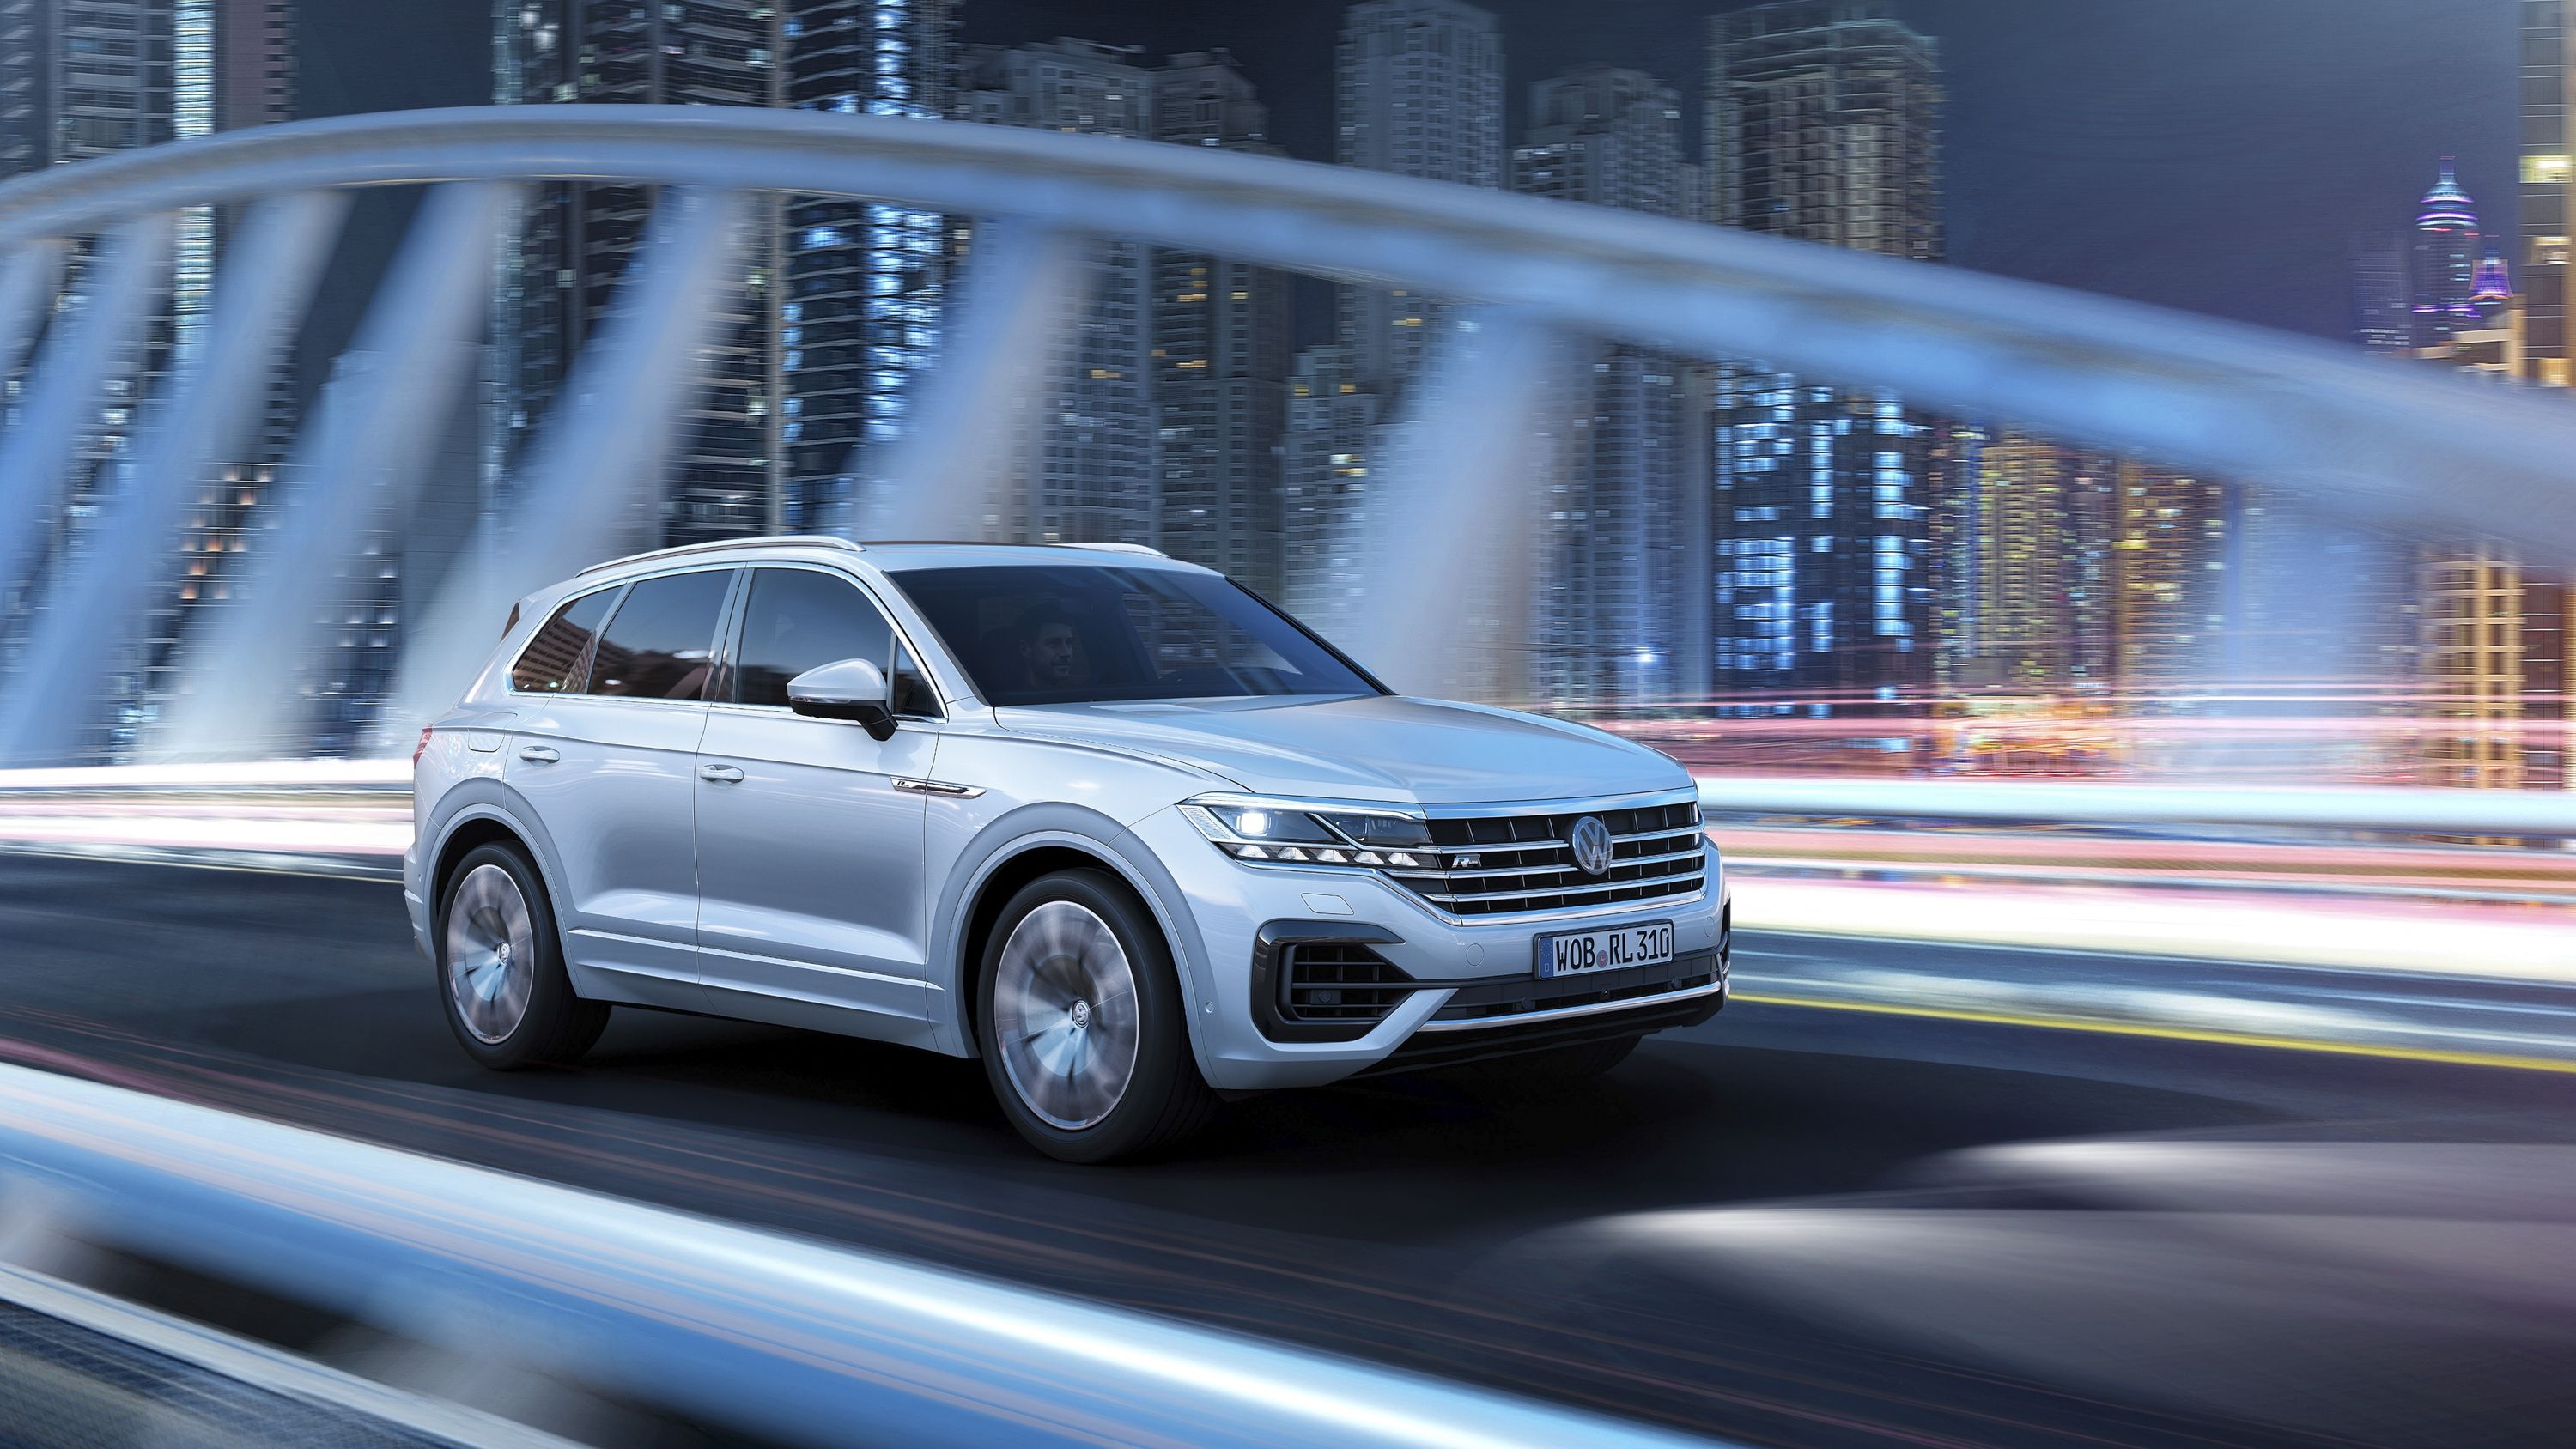 2019 The Volkswagen Touareg is Here, and It Puts the BMW X5 and Mercedes GLE to Shame